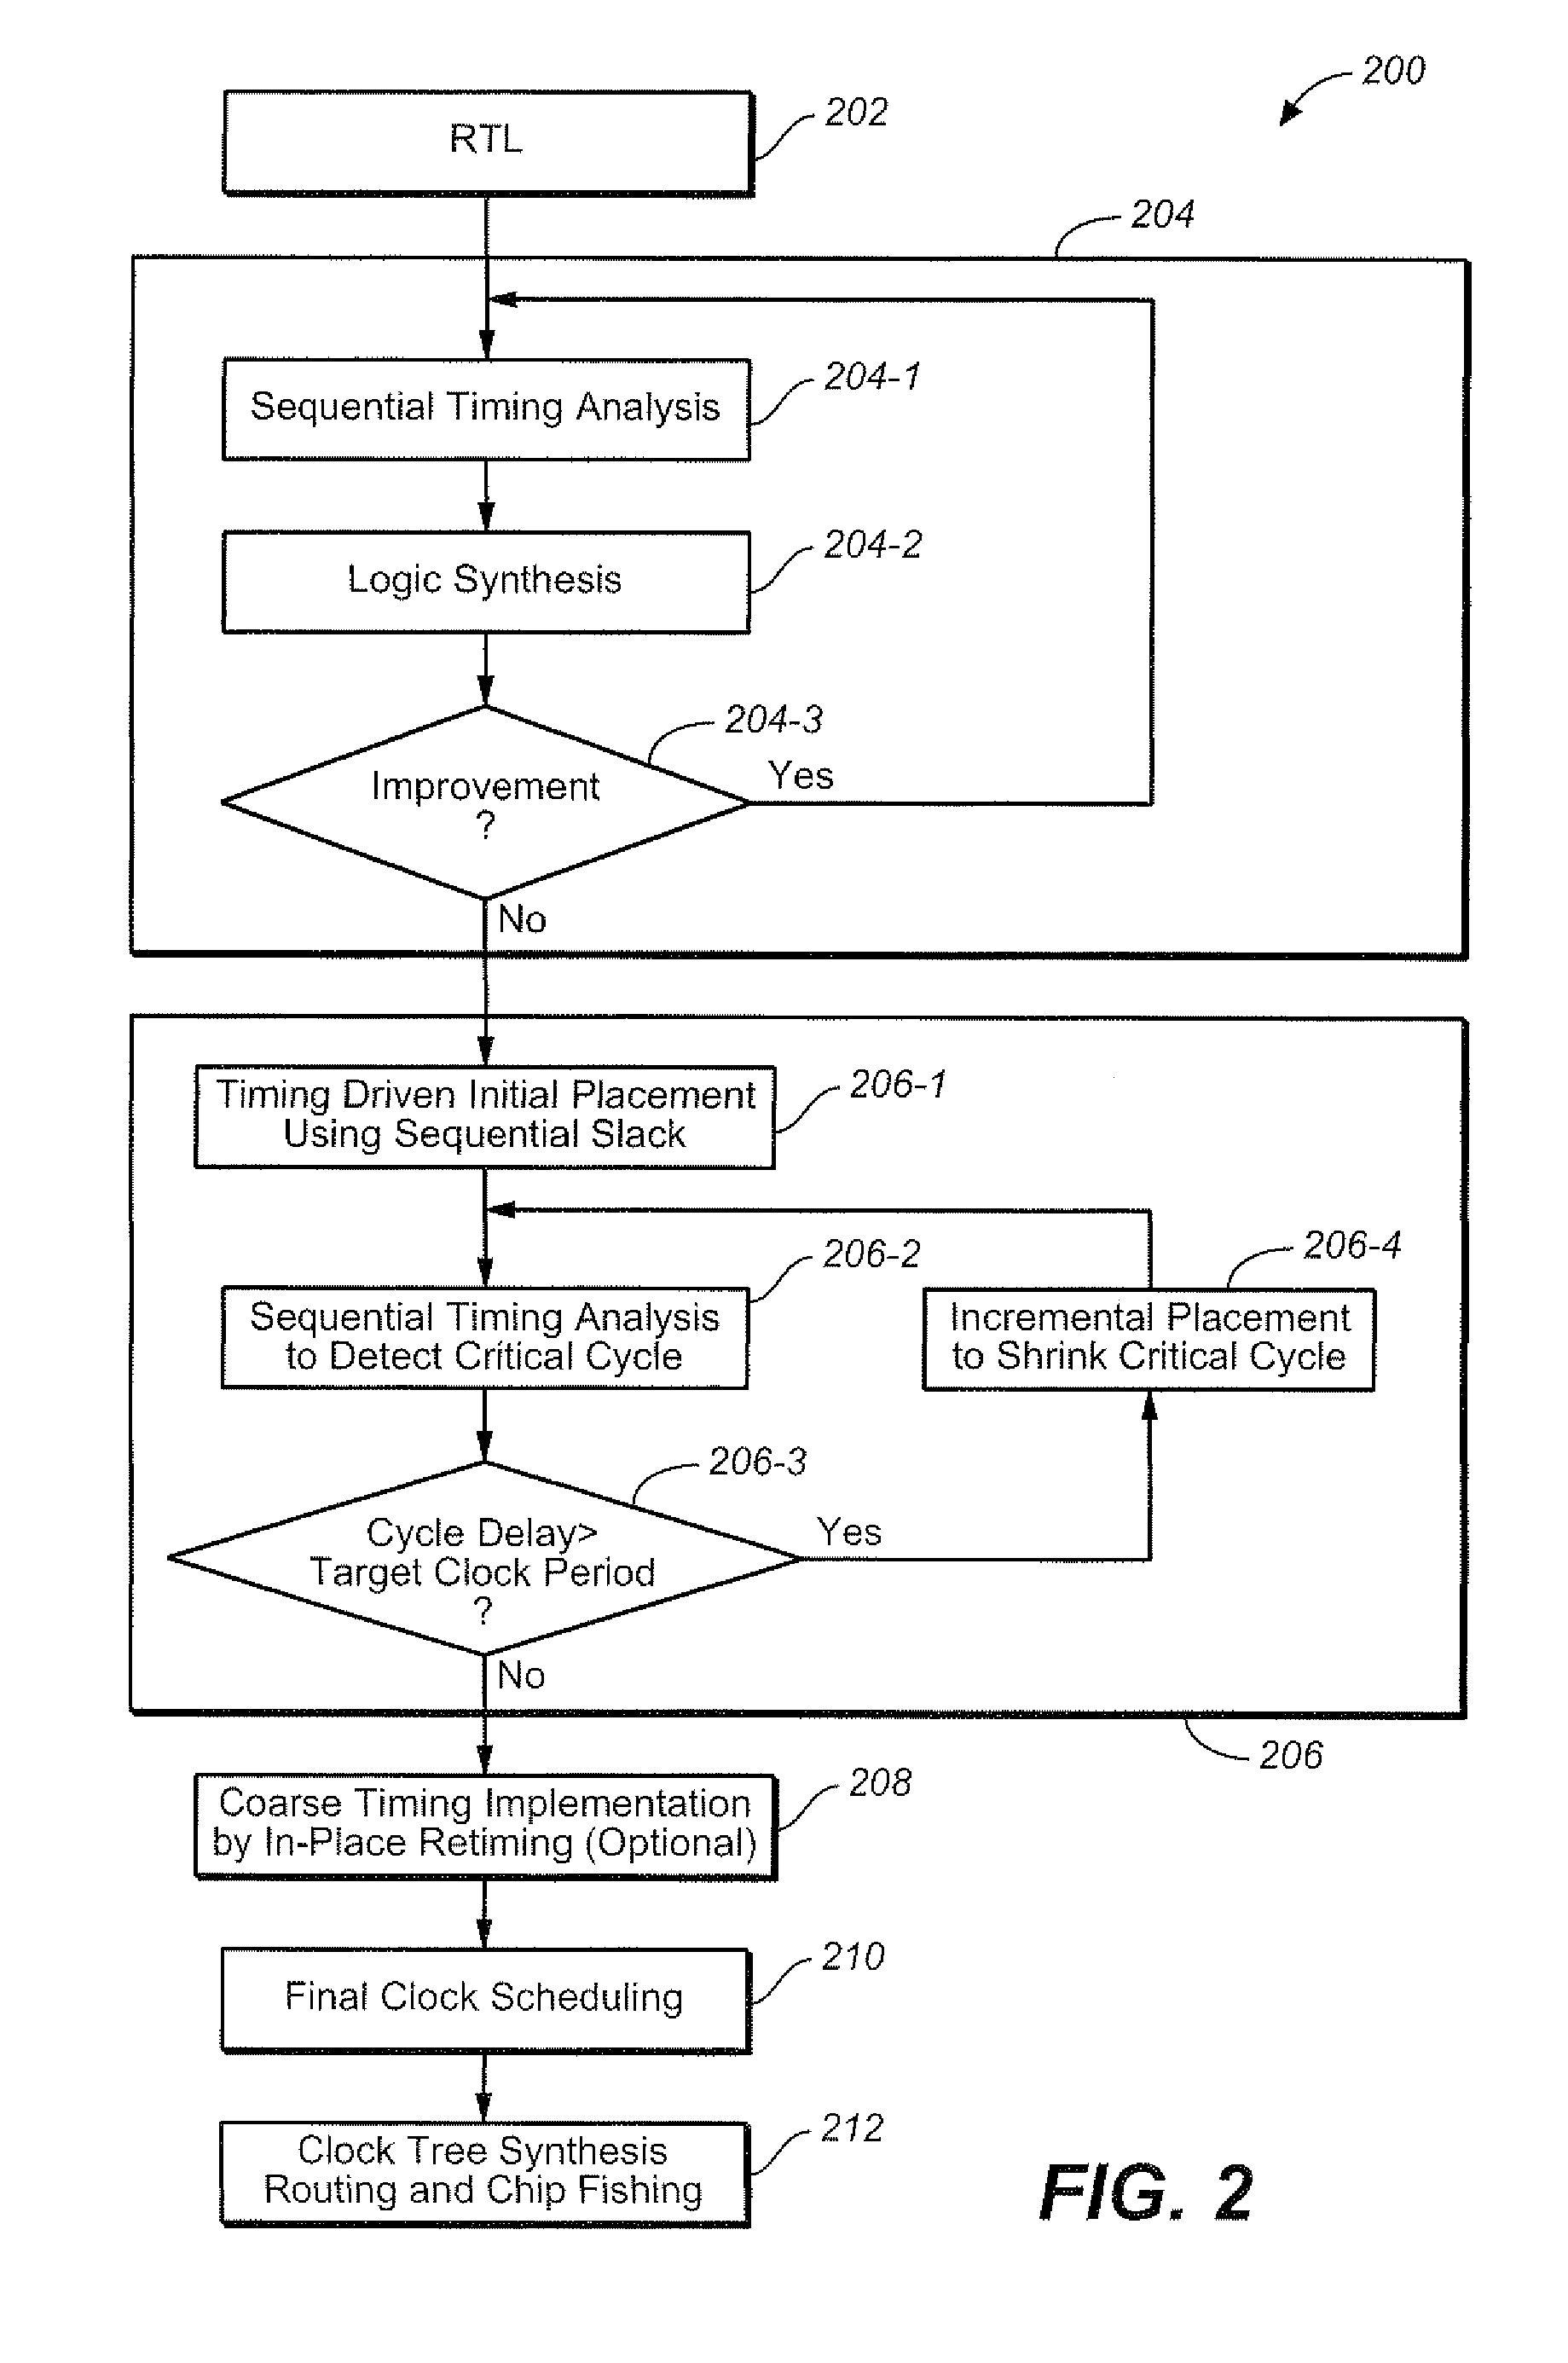 Data path and placement optimization in an integrated circuit through use of sequential timing information